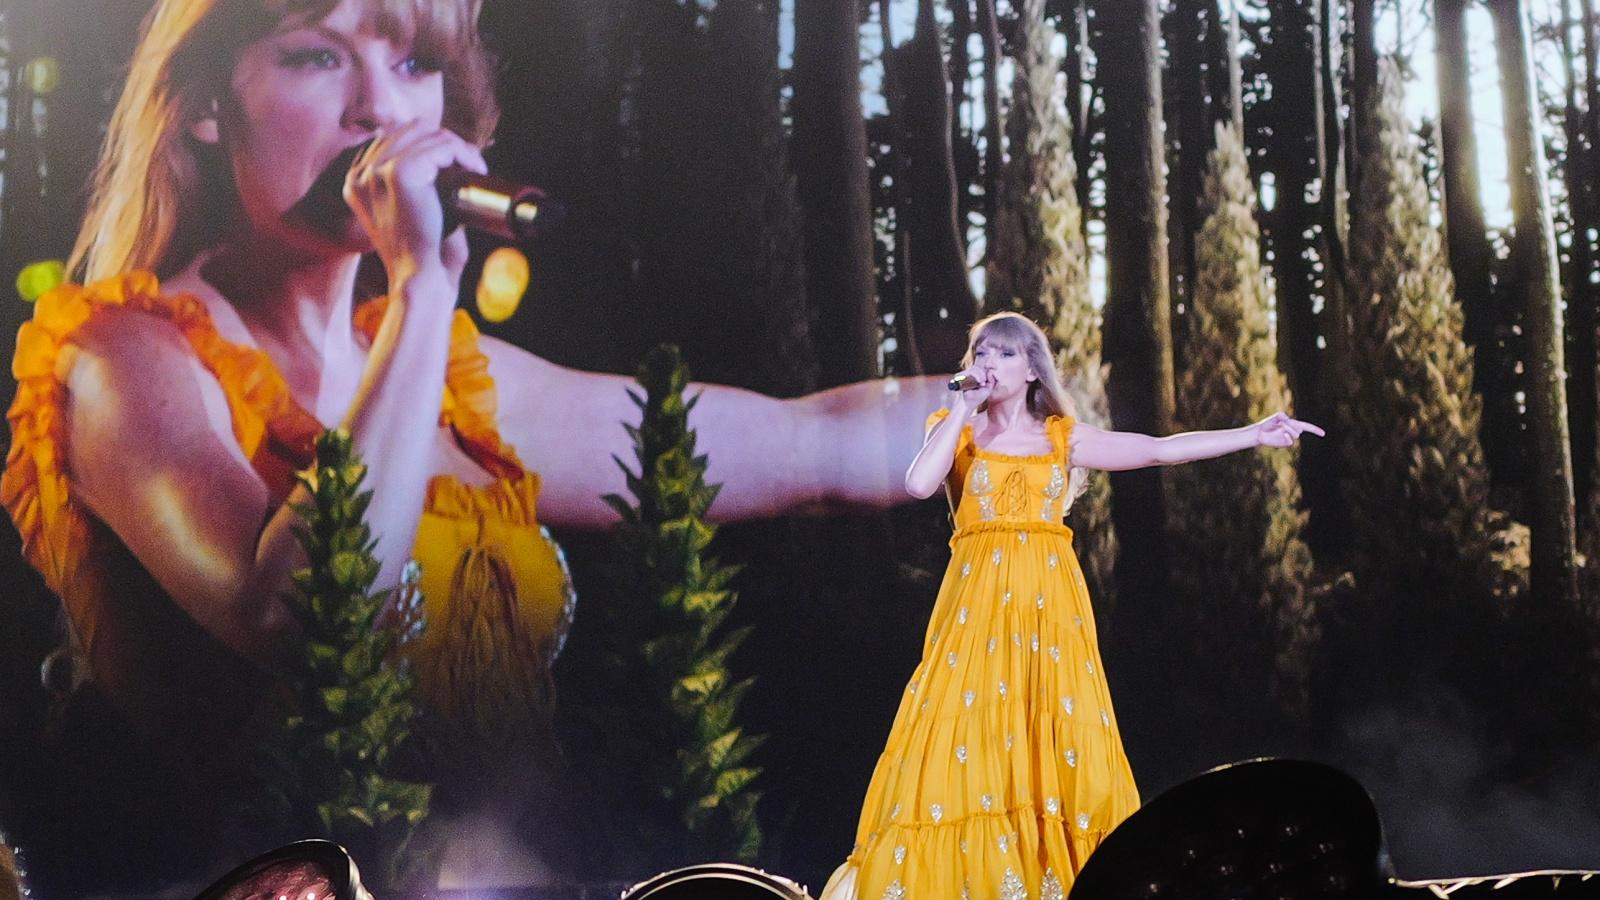 Taylor Swift in a yellow dress performing onstage during her Eras Tour